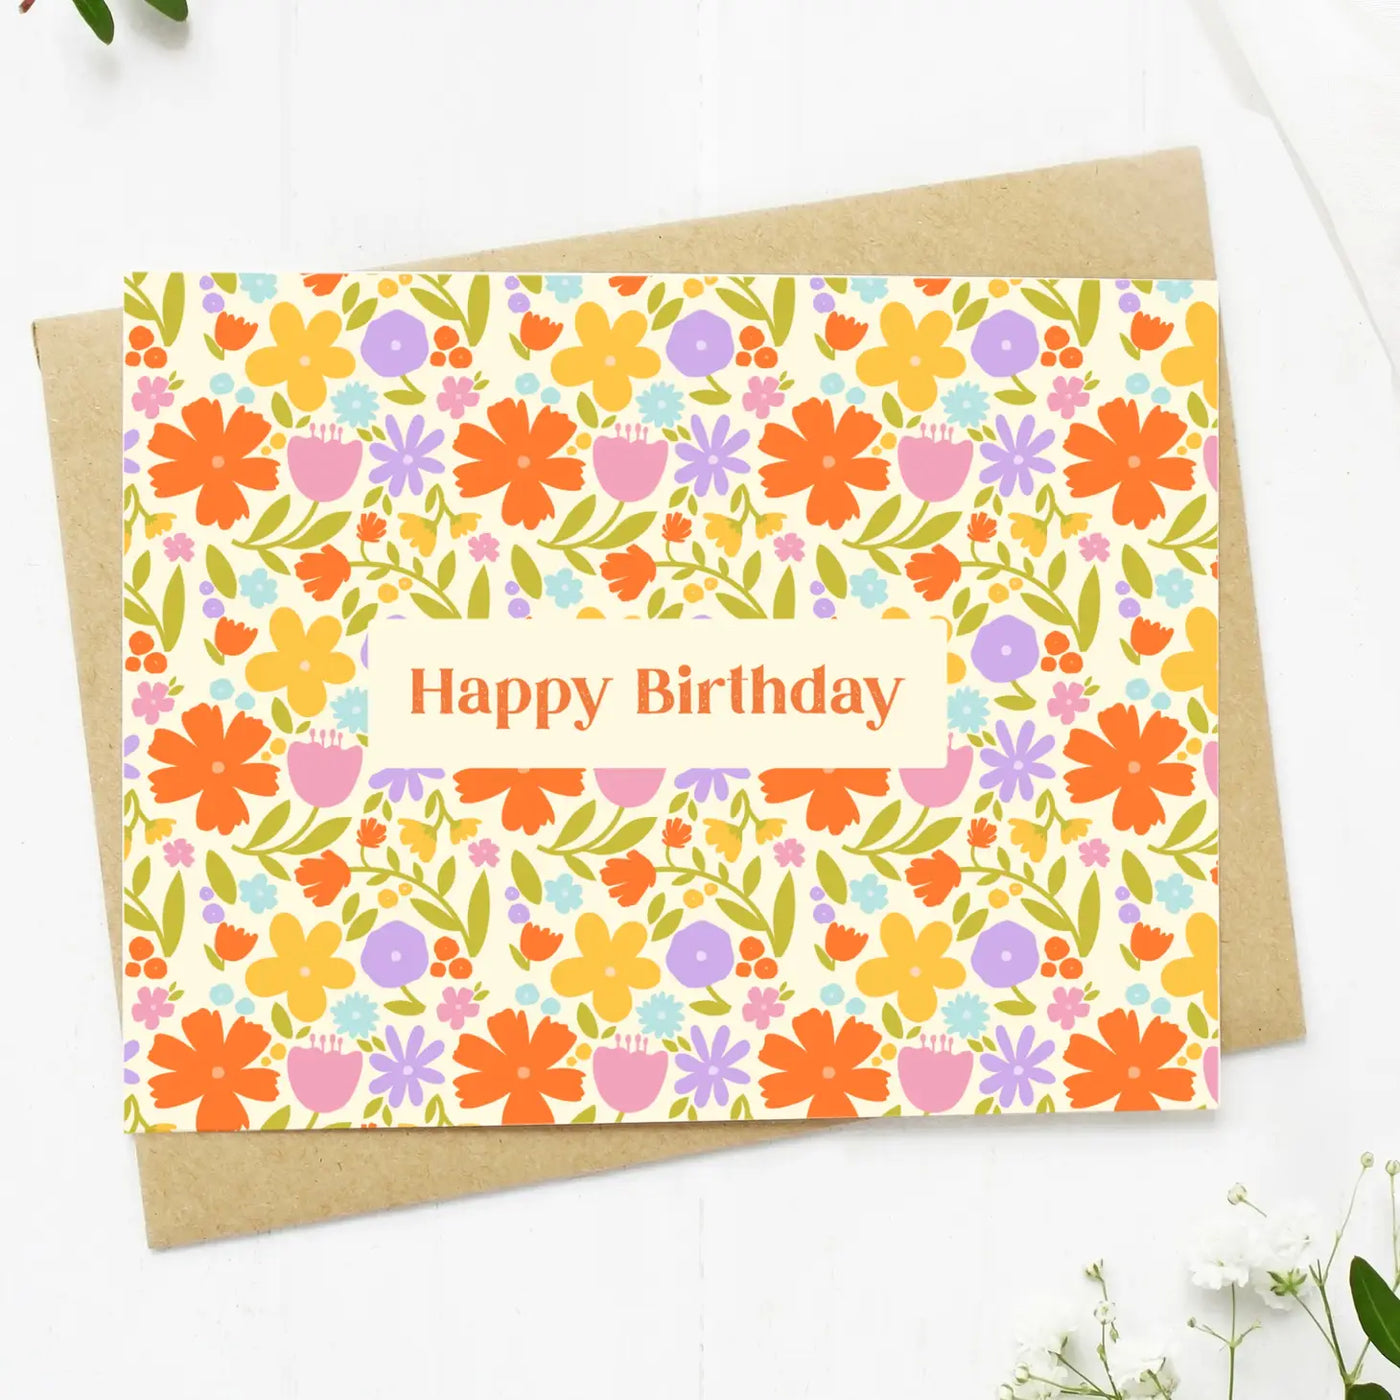 Happy birthday card floral flowers for her spring summer cute card gift for her made in the Usa woman-owned business small 